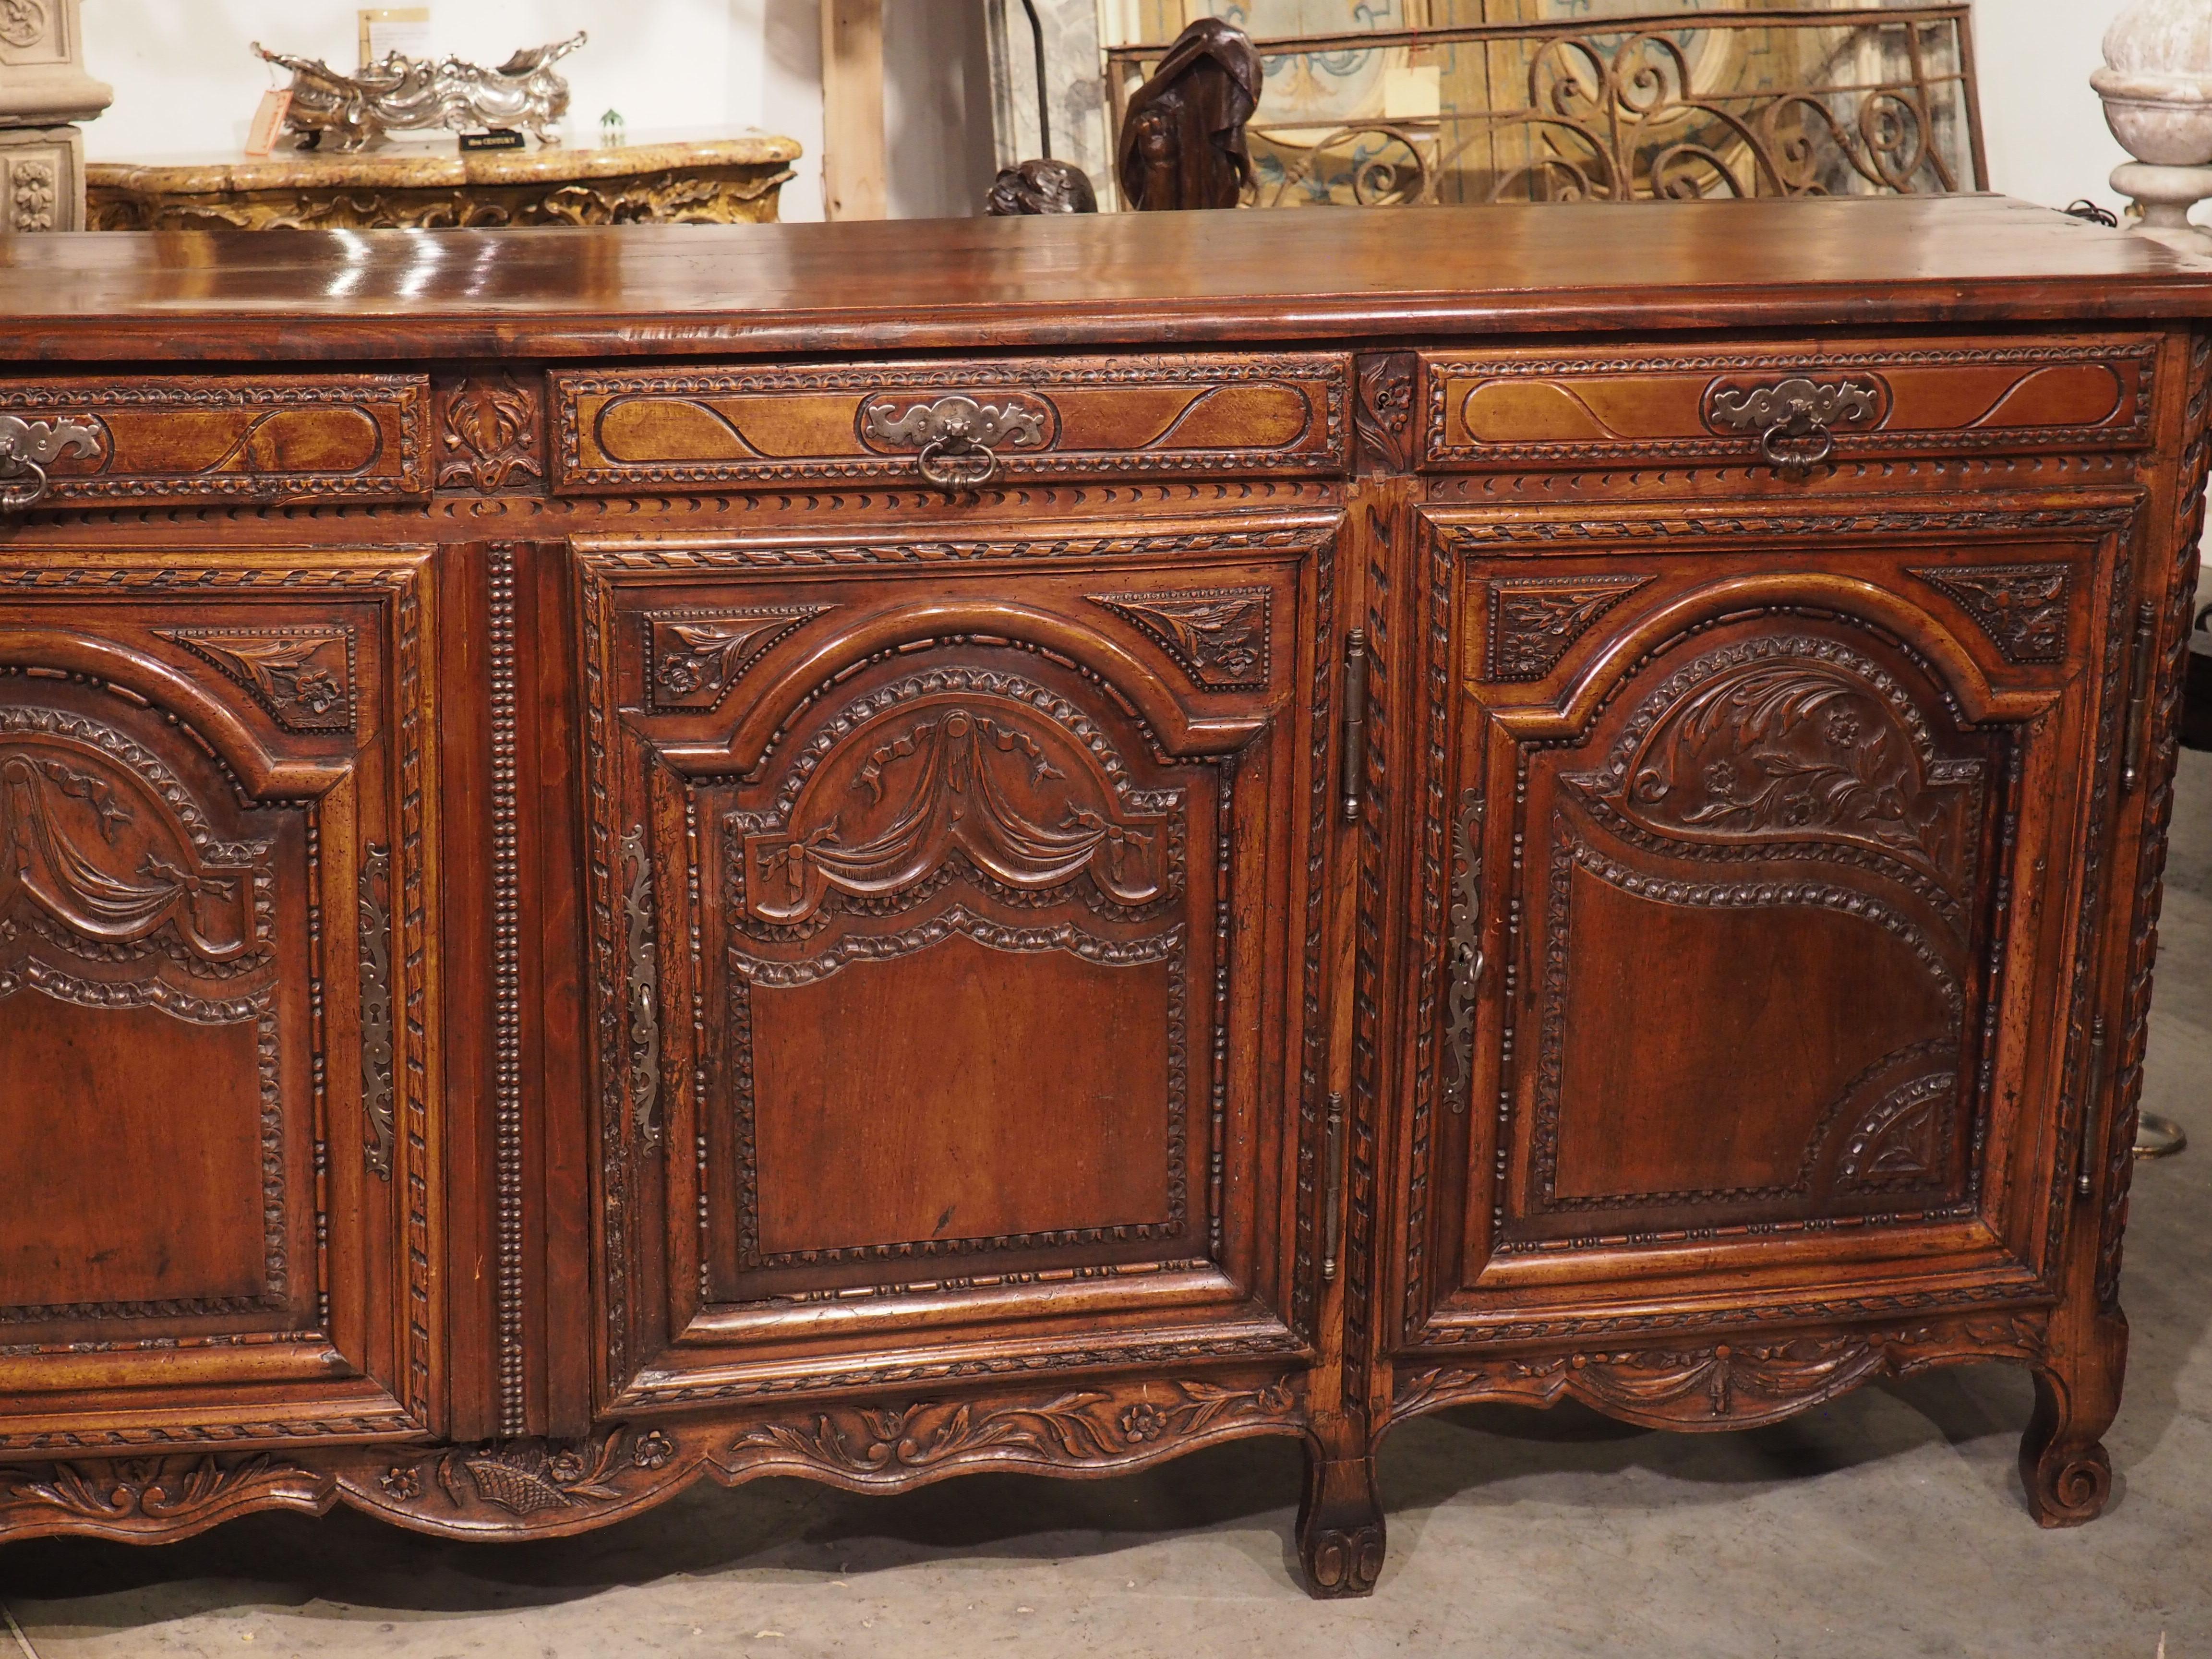 This charming antique buffet is a wonderful example of French regional furniture making in the 18th century. Known as an enfilade because of it’s multiple doors, these types of buffets were used in dining rooms in French country homes for hundreds